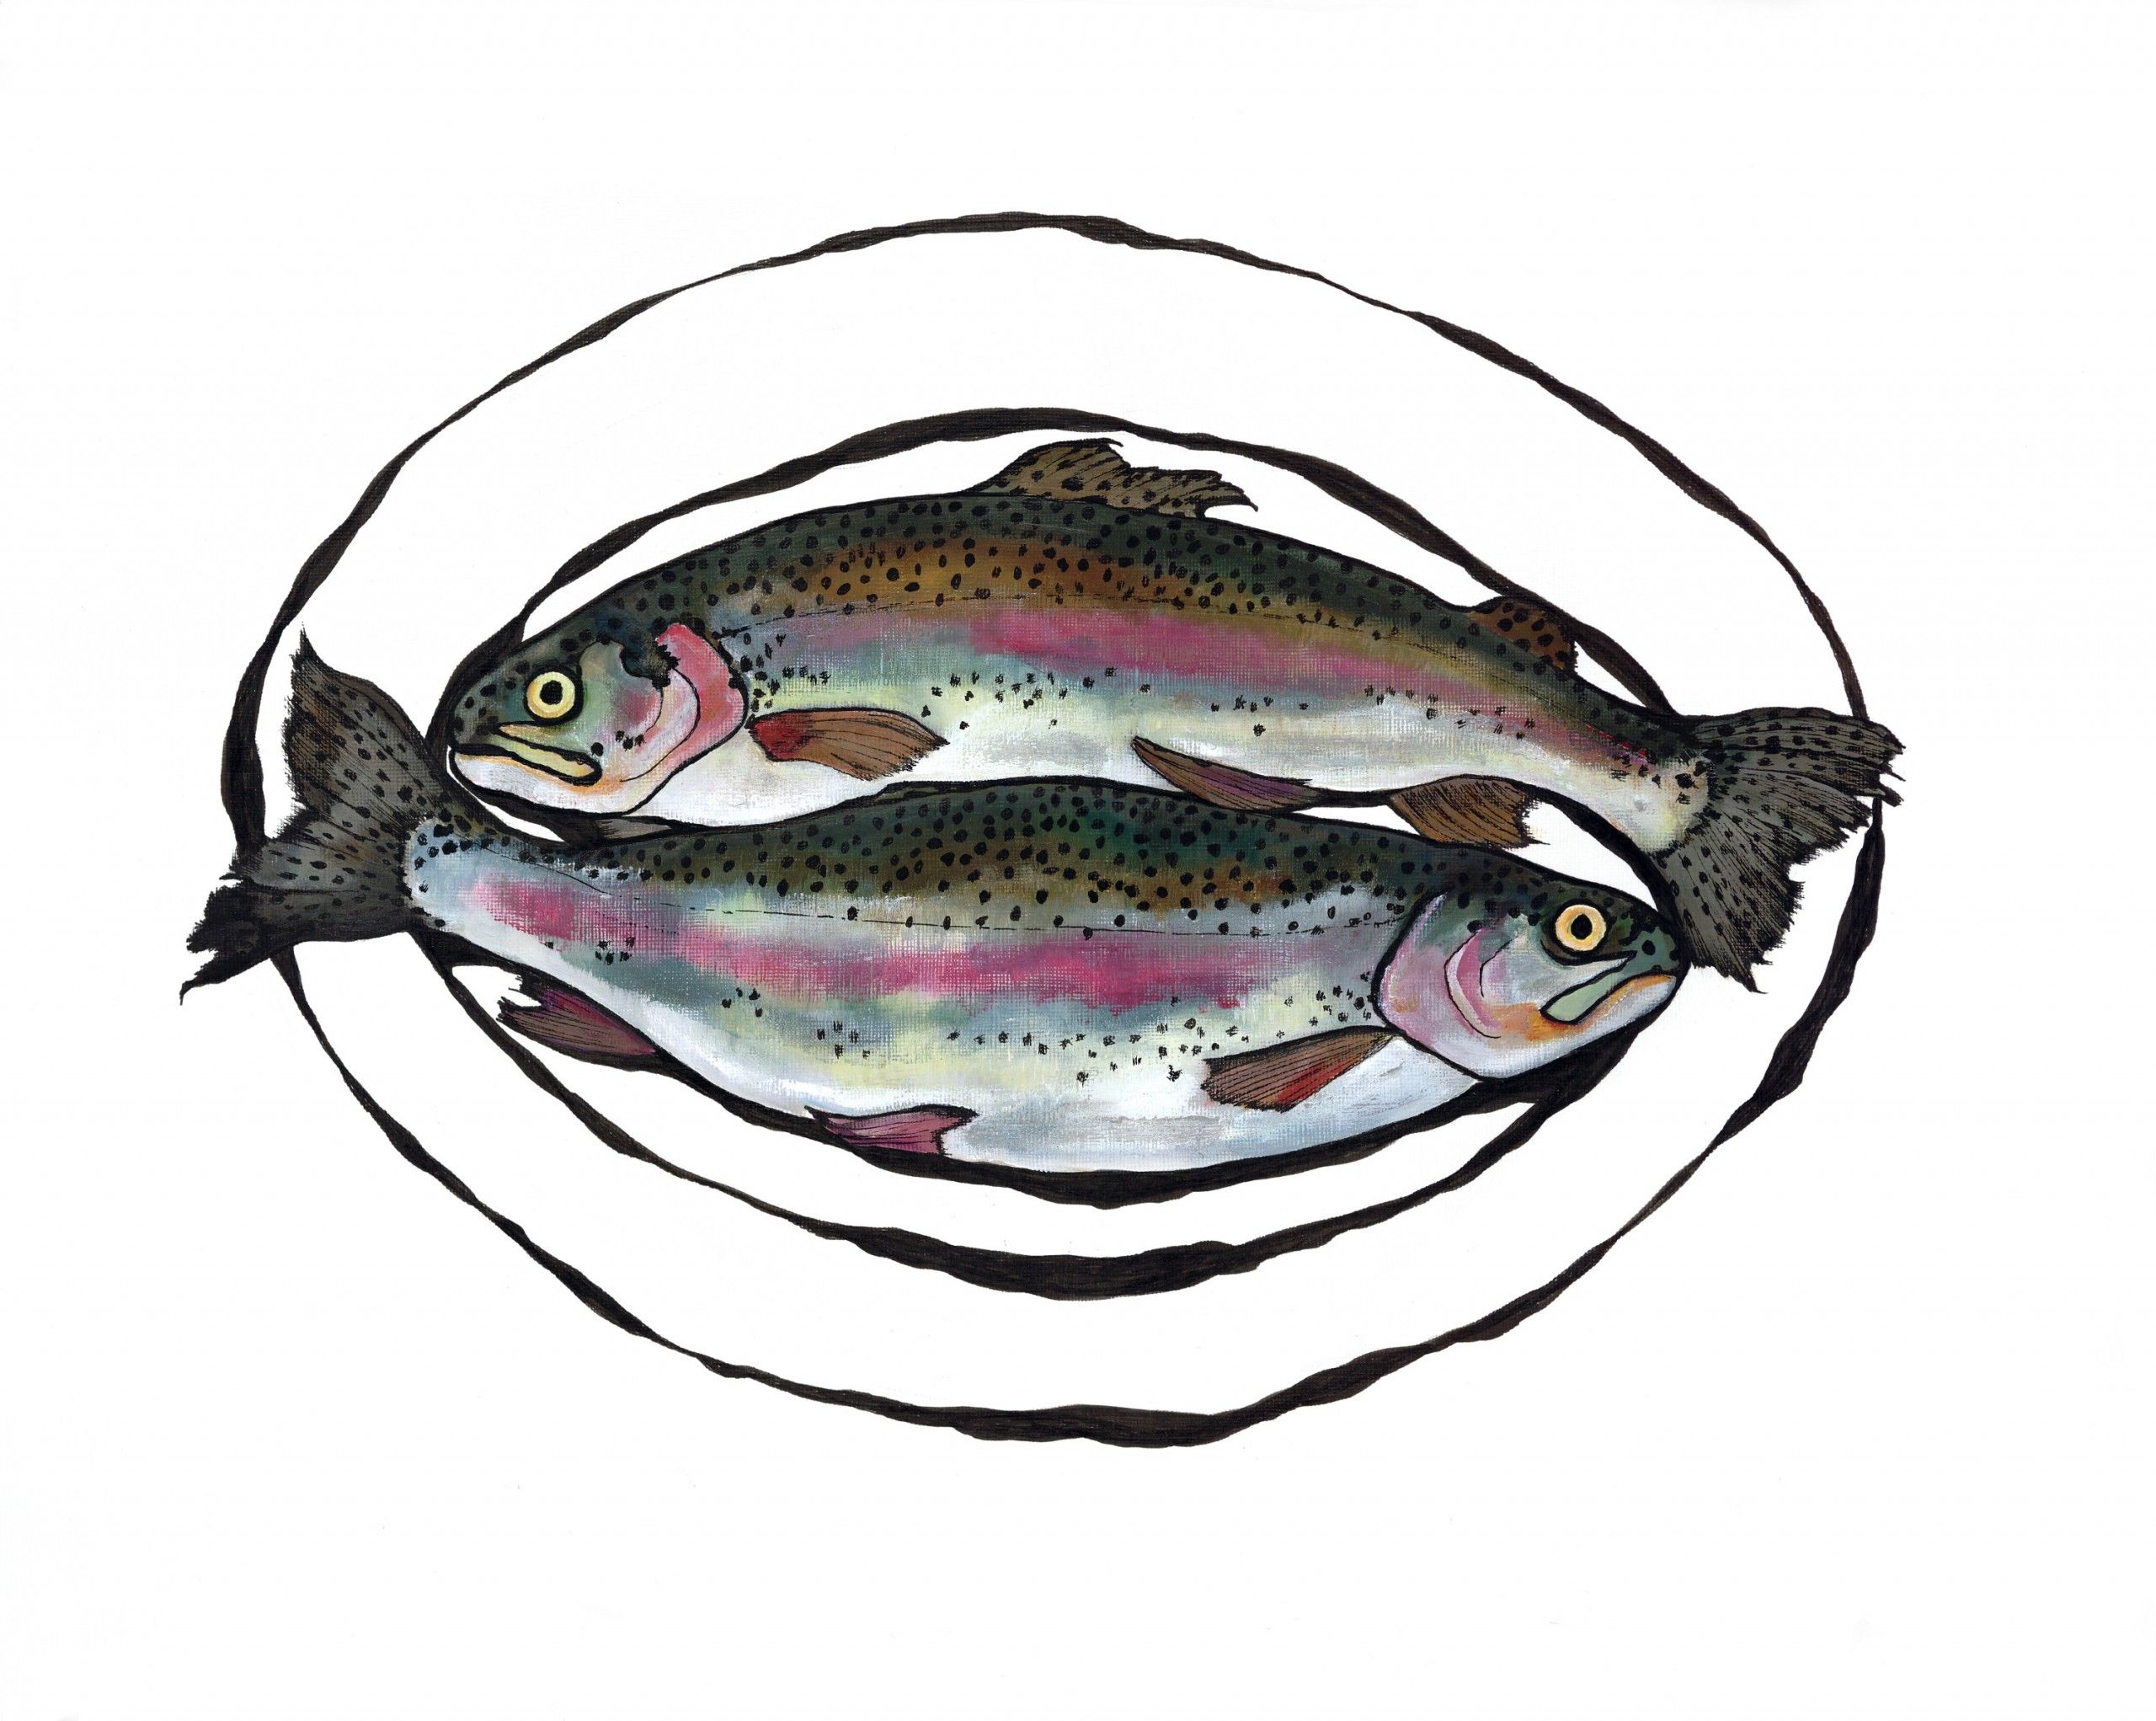 Blagdon Trout by Lucy Routh